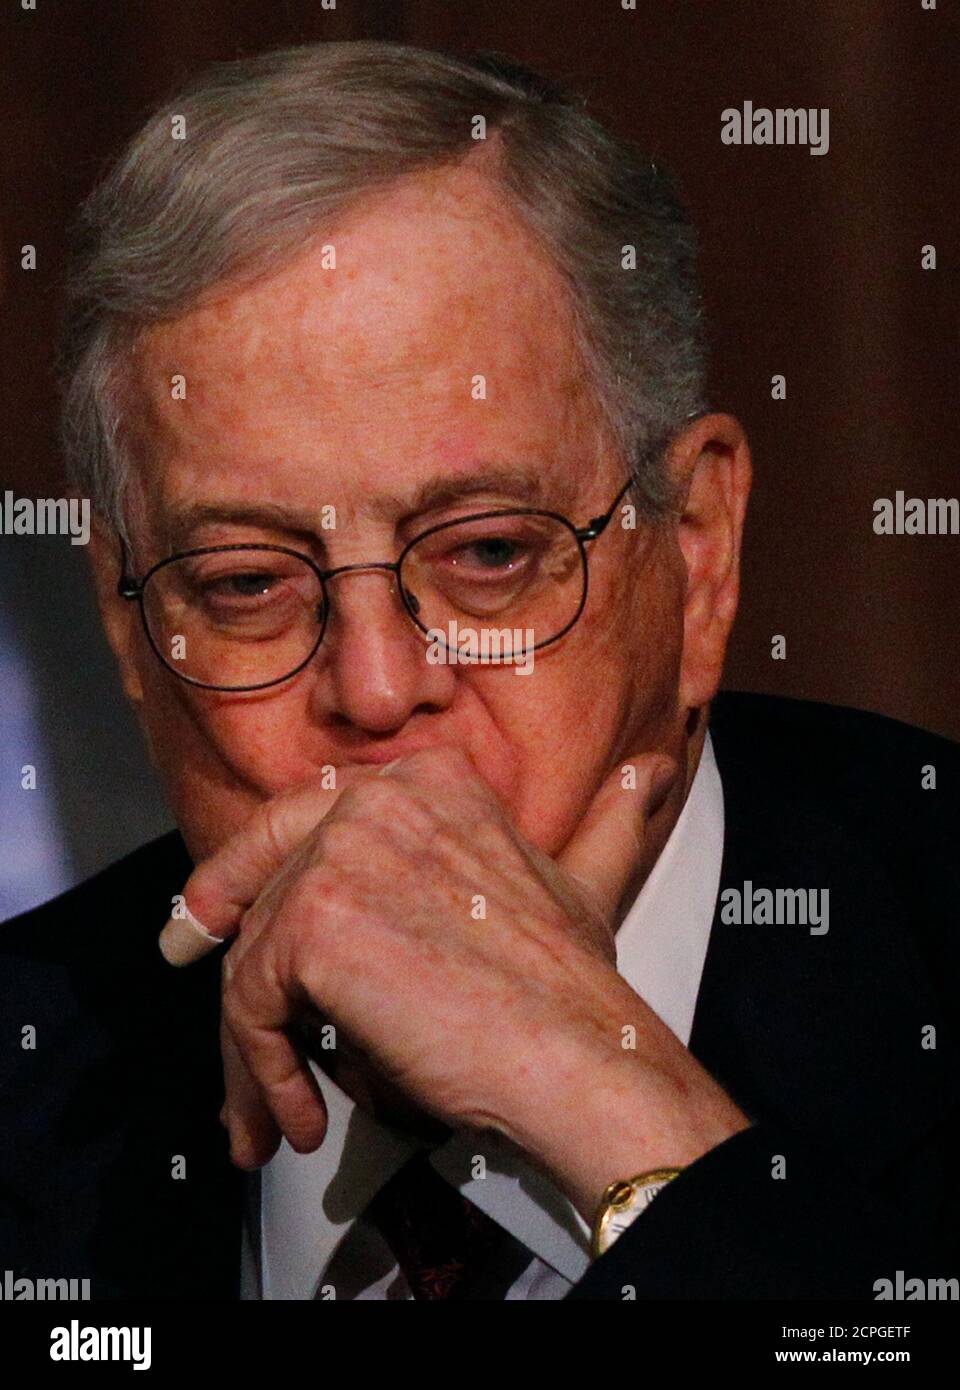 David Koch, executive vice president of Koch Industries, attends an  Economic Club of New York event in New York, December 10, 2012.  REUTERS/Brendan McDermid (UNITED STATES - Tags: BUSINESS POLITICS Stock  Photo - Alamy